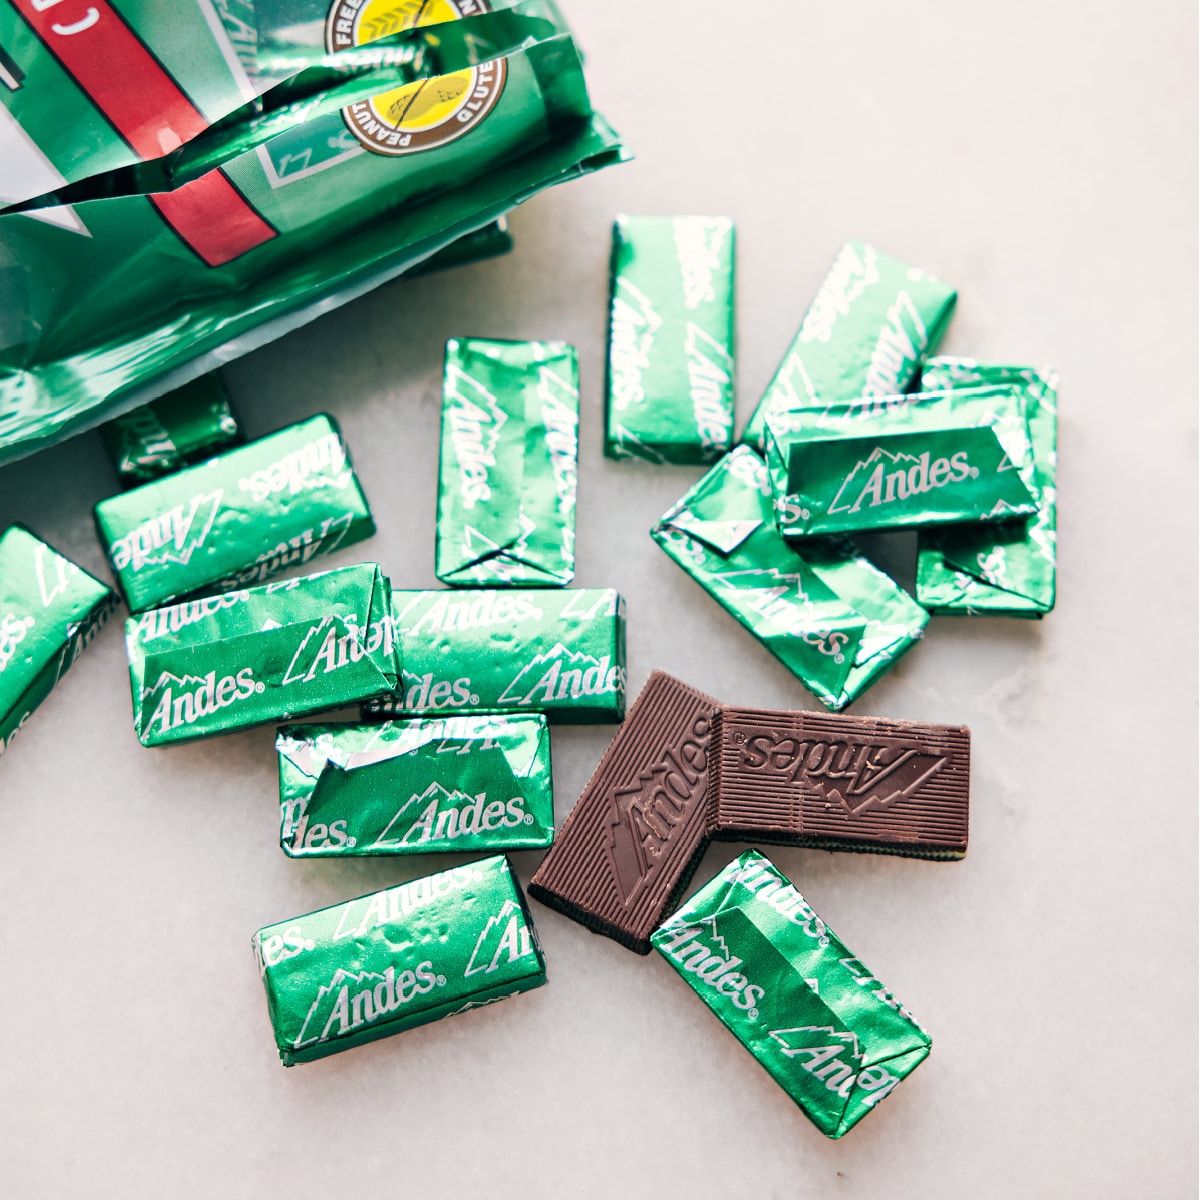 The Andes mint candies used in this recipe.